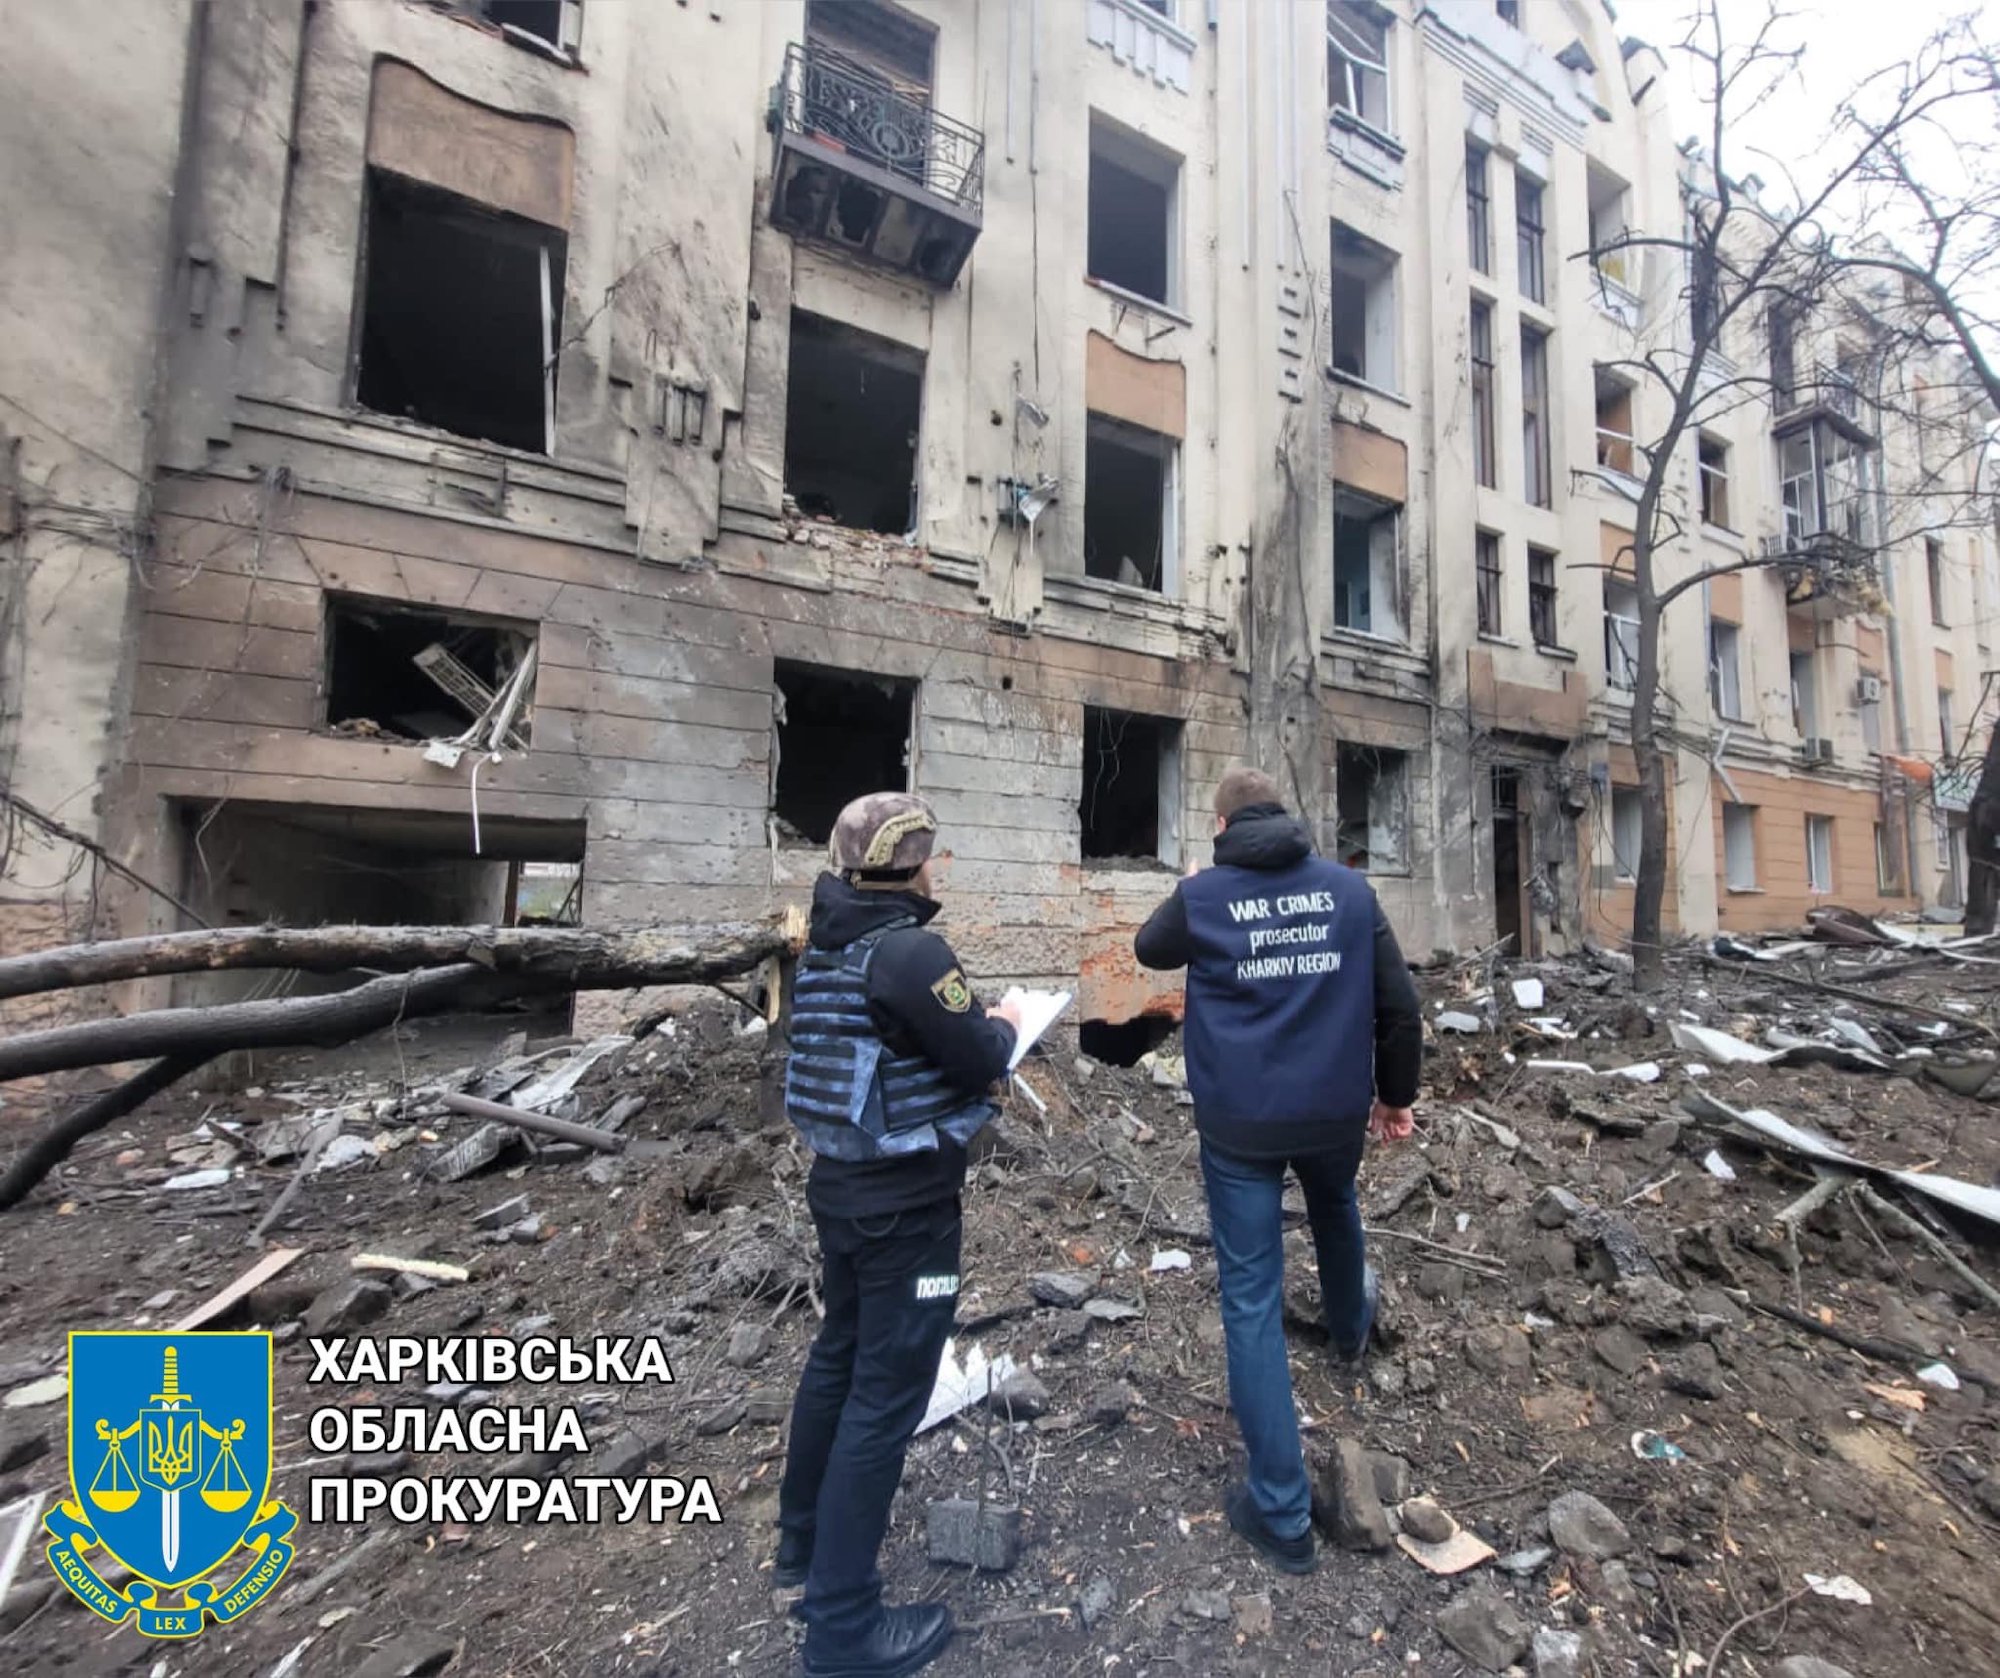 Two Ukrainian officials investigate the site of Russian shelling on Sunday.